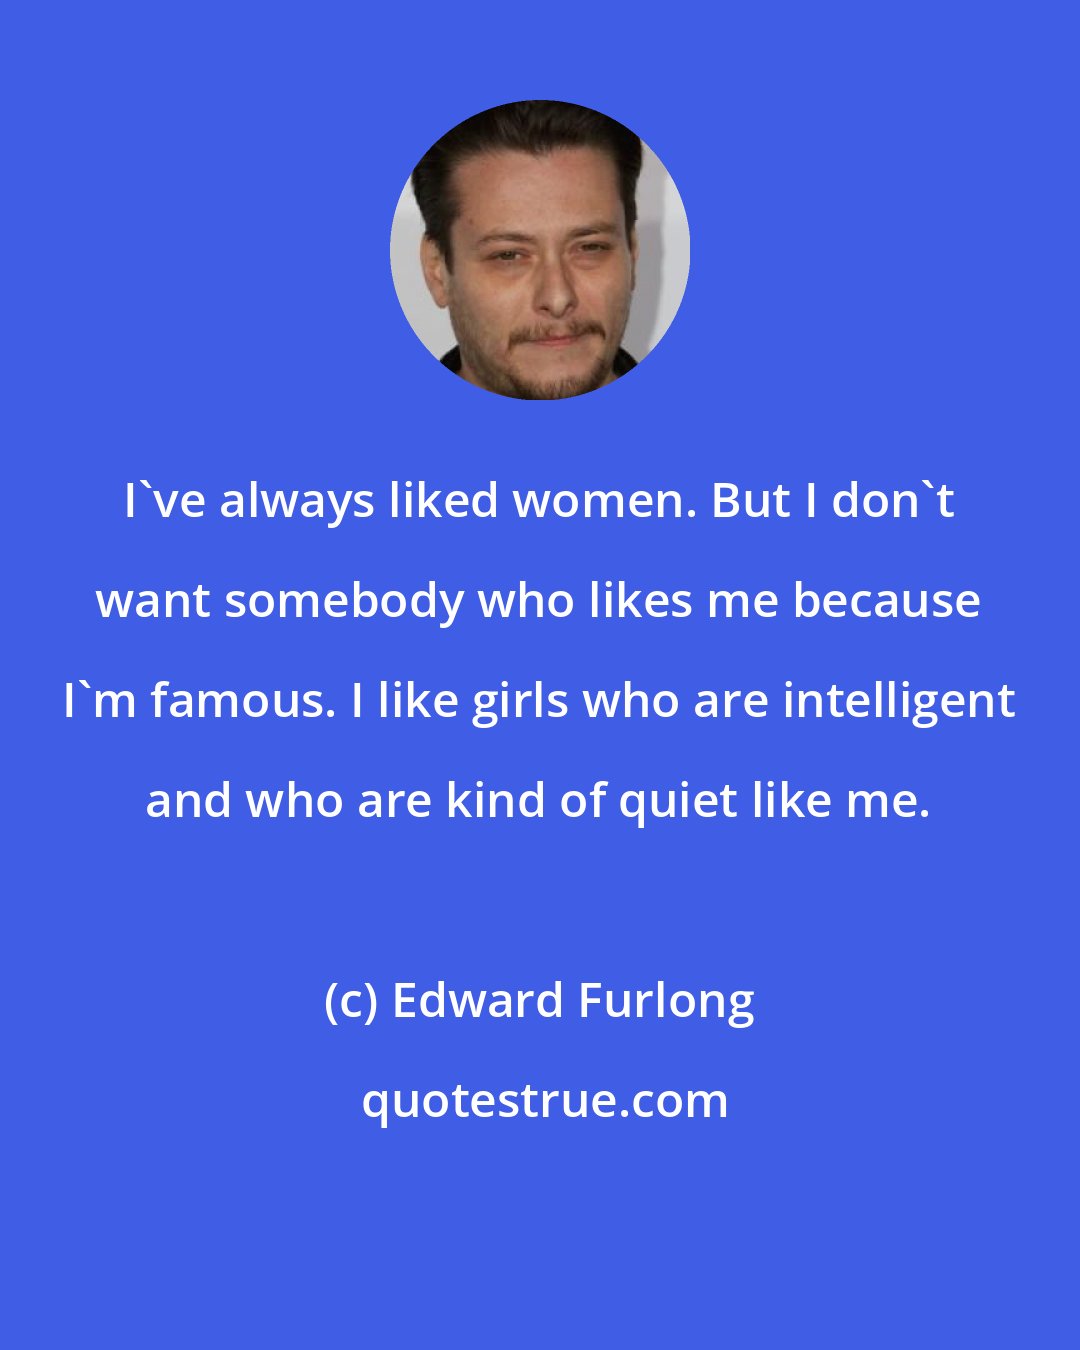 Edward Furlong: I've always liked women. But I don't want somebody who likes me because I'm famous. I like girls who are intelligent and who are kind of quiet like me.